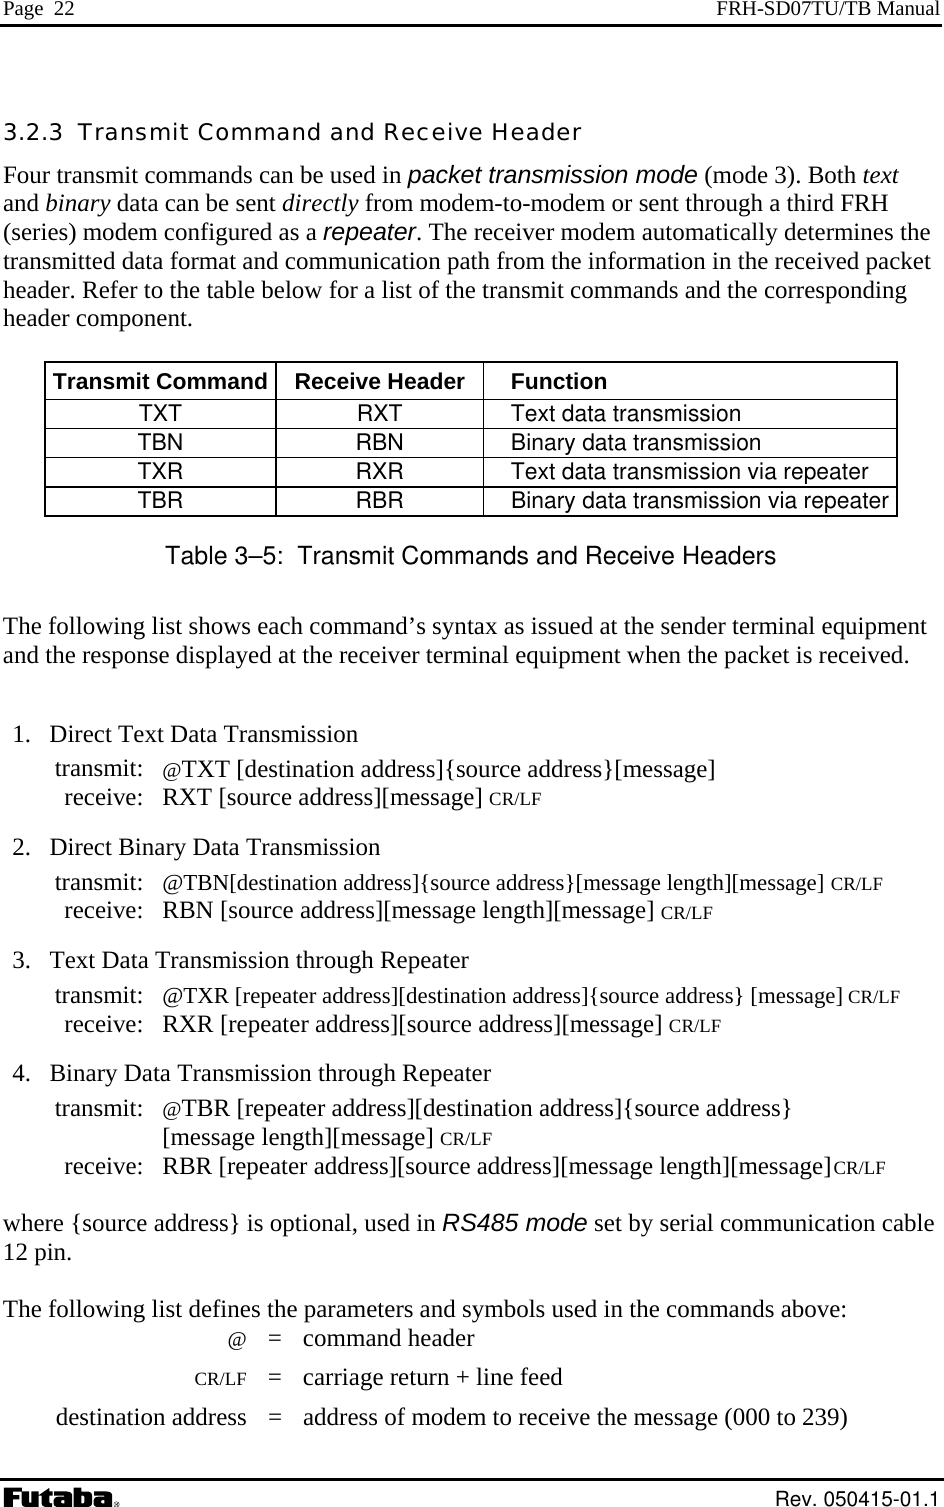 Page  22  FRH-SD07TU/TB Manual 3.2.3  Transmit Command and Receive Header Four transmit commands can be used in packet transmission mode (mode 3). Both text and binary data can be sent directly from modem-to-modem or sent through a third FRH (series) modem configured as a repeater. The receiver modem automatically determines the transmitted data format and communication path from the information in the received packet header. Refer to the table below for a list of the transmit commands and the corresponding header component.  Transmit Command  Receive Header Function TXT  RXT  Text data transmission TBN  RBN  Binary data transmission TXR  RXR  Text data transmission via repeater TBR  RBR  Binary data transmission via repeater Table 3–5:  Transmit Commands and Receive Headers The following list shows each command’s syntax as issued at the sender terminal equipment and the response displayed at the receiver terminal equipment when the packet is received.   1.  Direct Text Data Transmission  transmit: @TXT [destination address]{source address}[message]   receive: RXT [source address][message] CR/LF  2.  Direct Binary Data Transmission  transmit: @TBN[destination address]{source address}[message length][message] CR/LF  receive: RBN [source address][message length][message] CR/LF  3.  Text Data Transmission through Repeater  transmit: @TXR [repeater address][destination address]{source address} [message] CR/LF  receive: RXR [repeater address][source address][message] CR/LF  4.  Binary Data Transmission through Repeater  transmit: @TBR [repeater address][destination address]{source address}    [message length][message] CR/LF  receive: RBR [repeater address][source address][message length][message] CR/LF  where {source address} is optional, used in RS485 mode set by serial communication cable 12 pin.  The following list defines the parameters and symbols used in the commands above:  @ = command header  CR/LF  =  carriage return + line feed   destination address  =  address of modem to receive the message (000 to 239)  Rev. 050415-01.1 